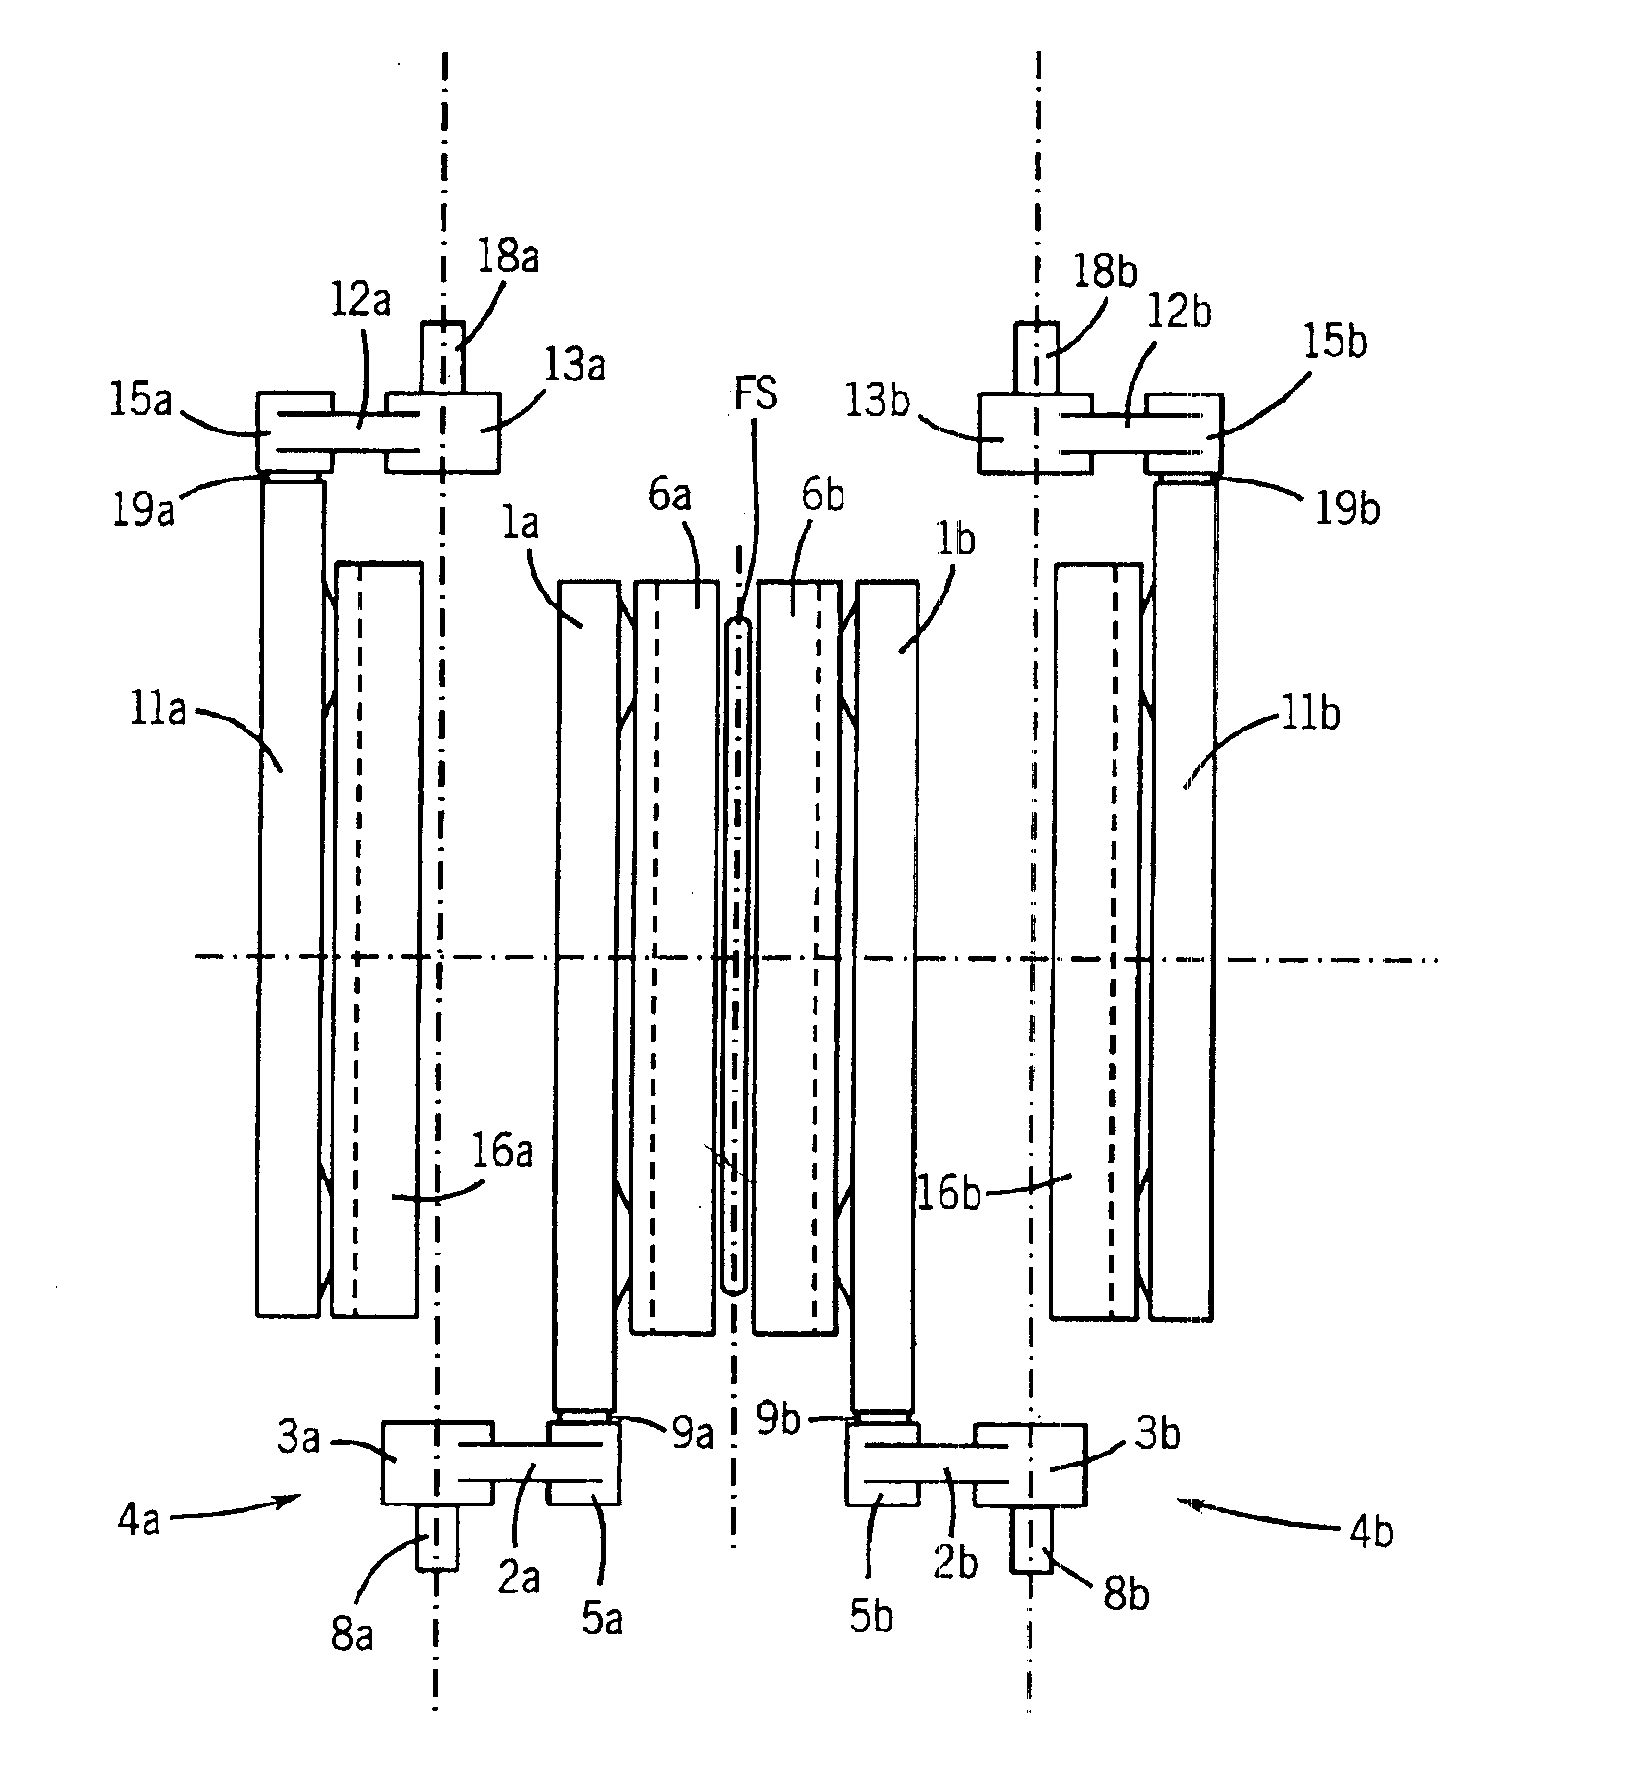 Apparatus for processing continuously fed elongate material